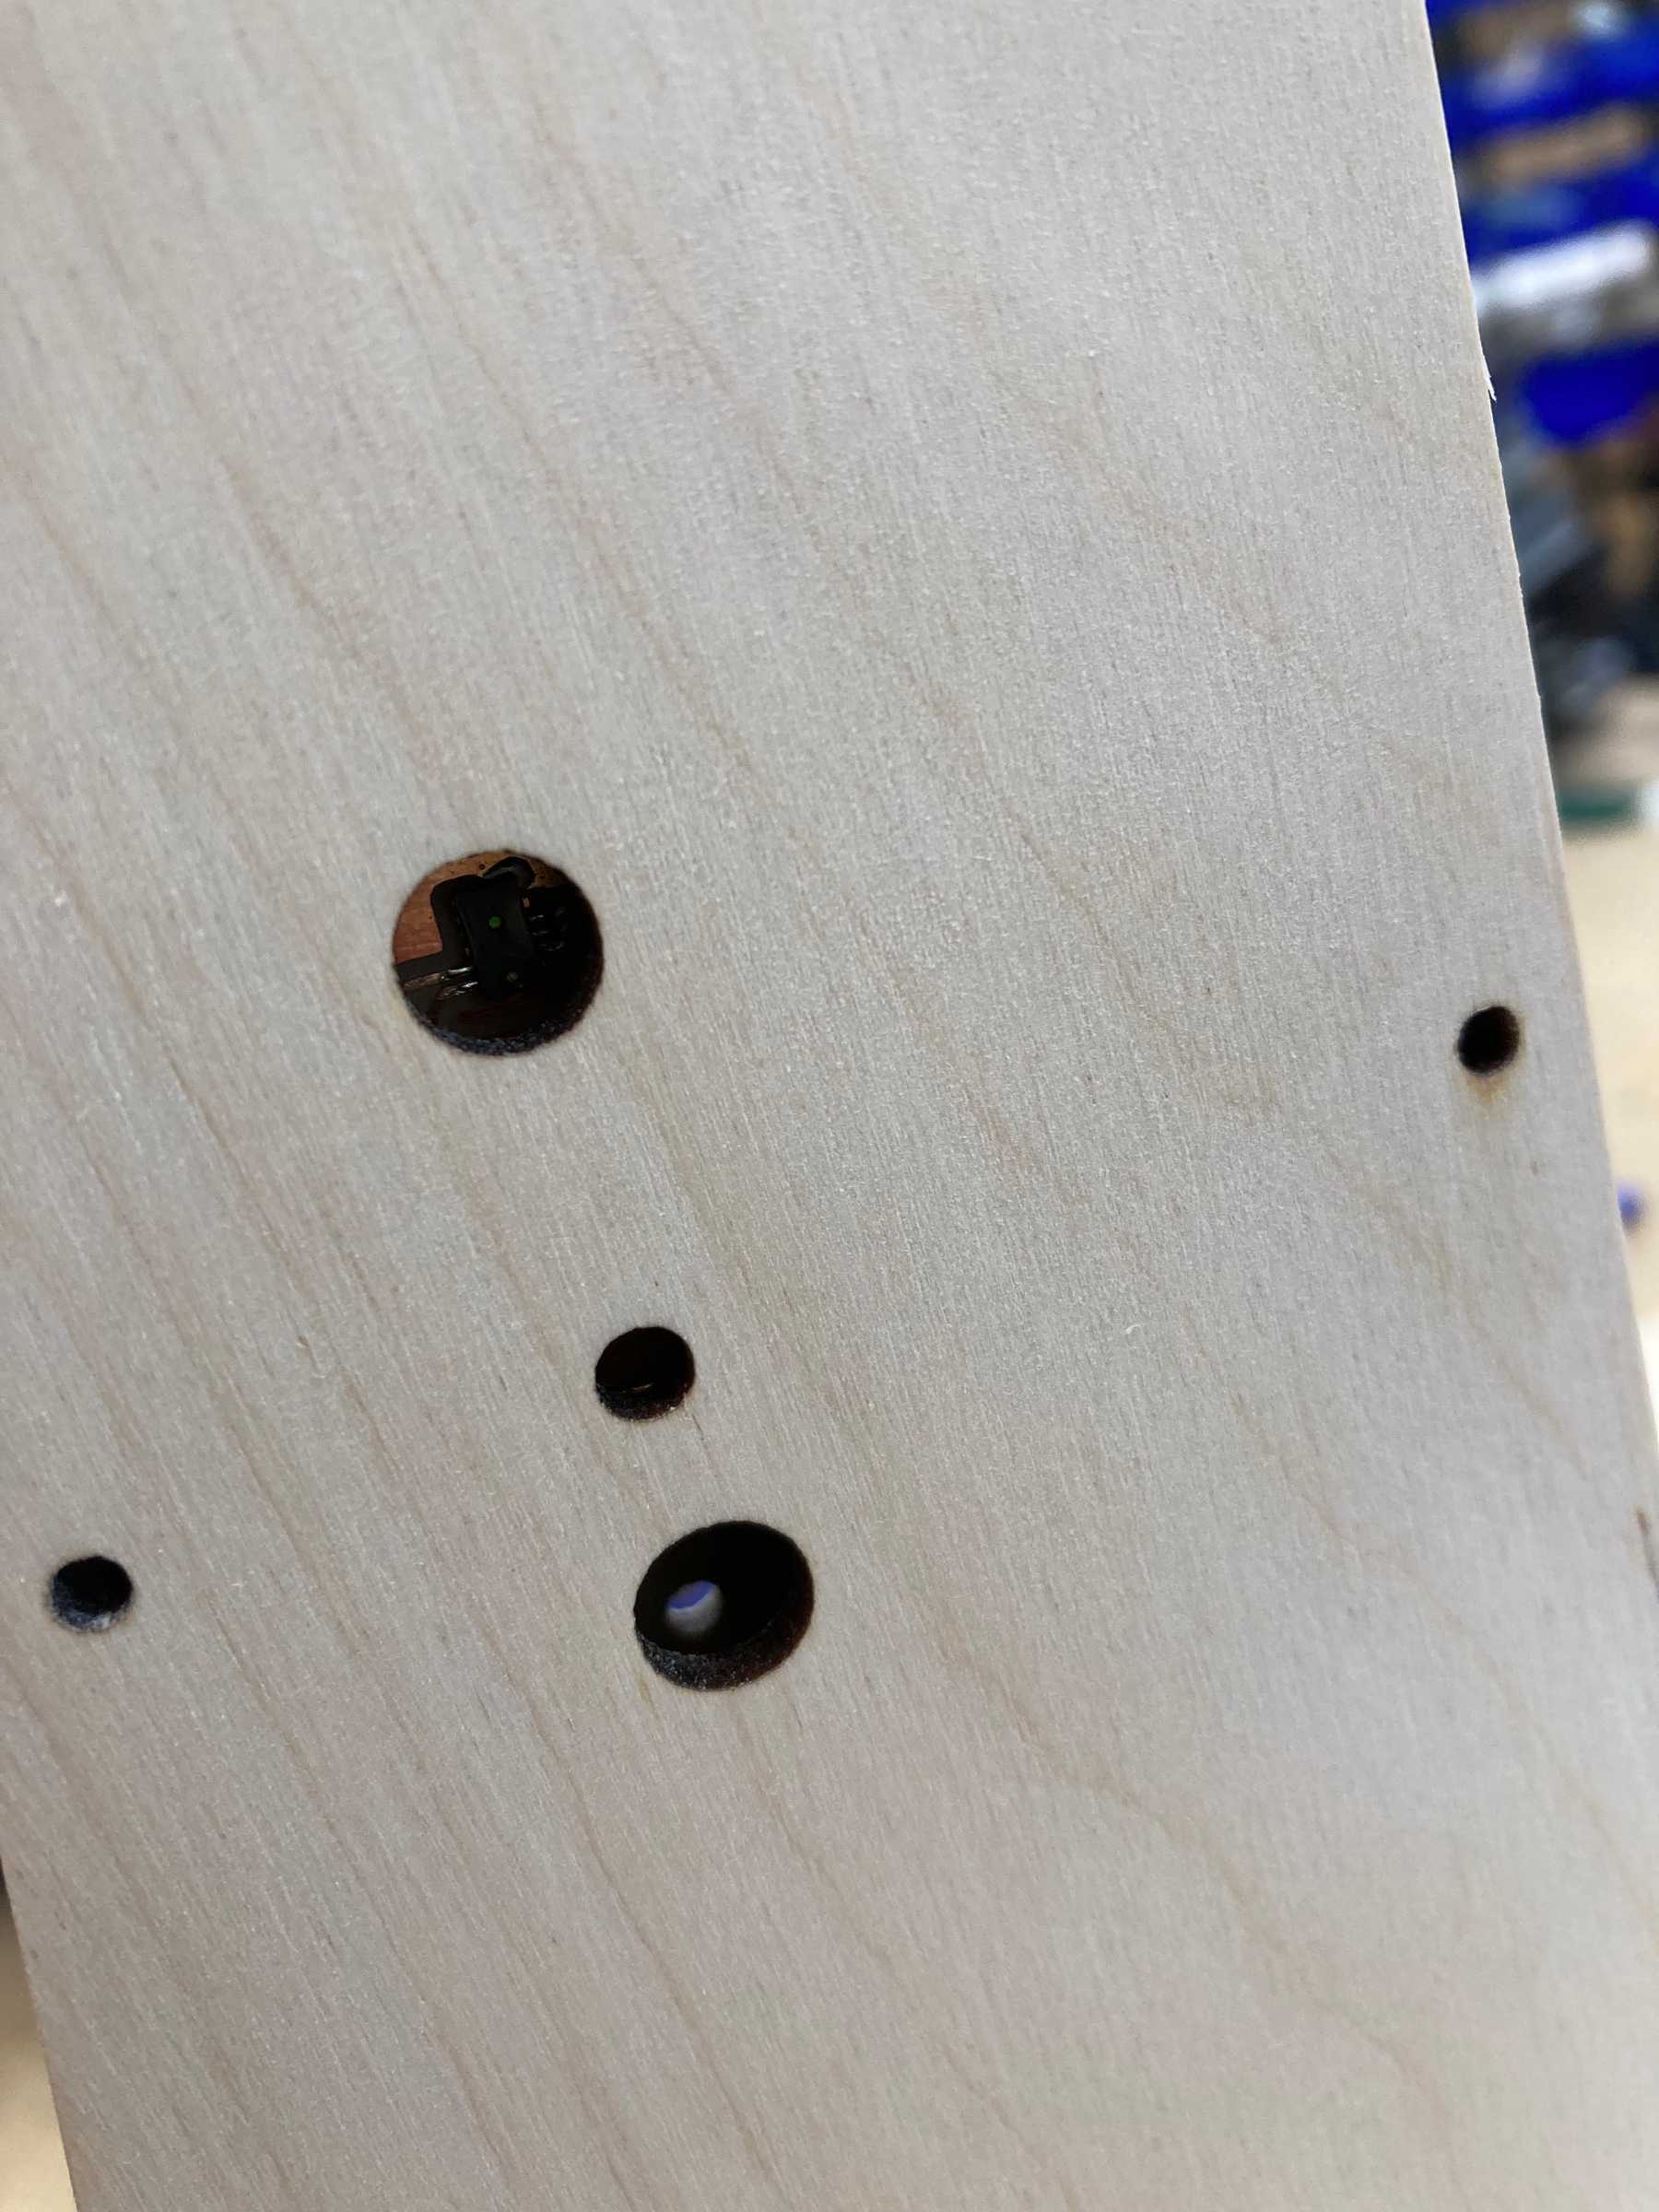 Holes for the sensors